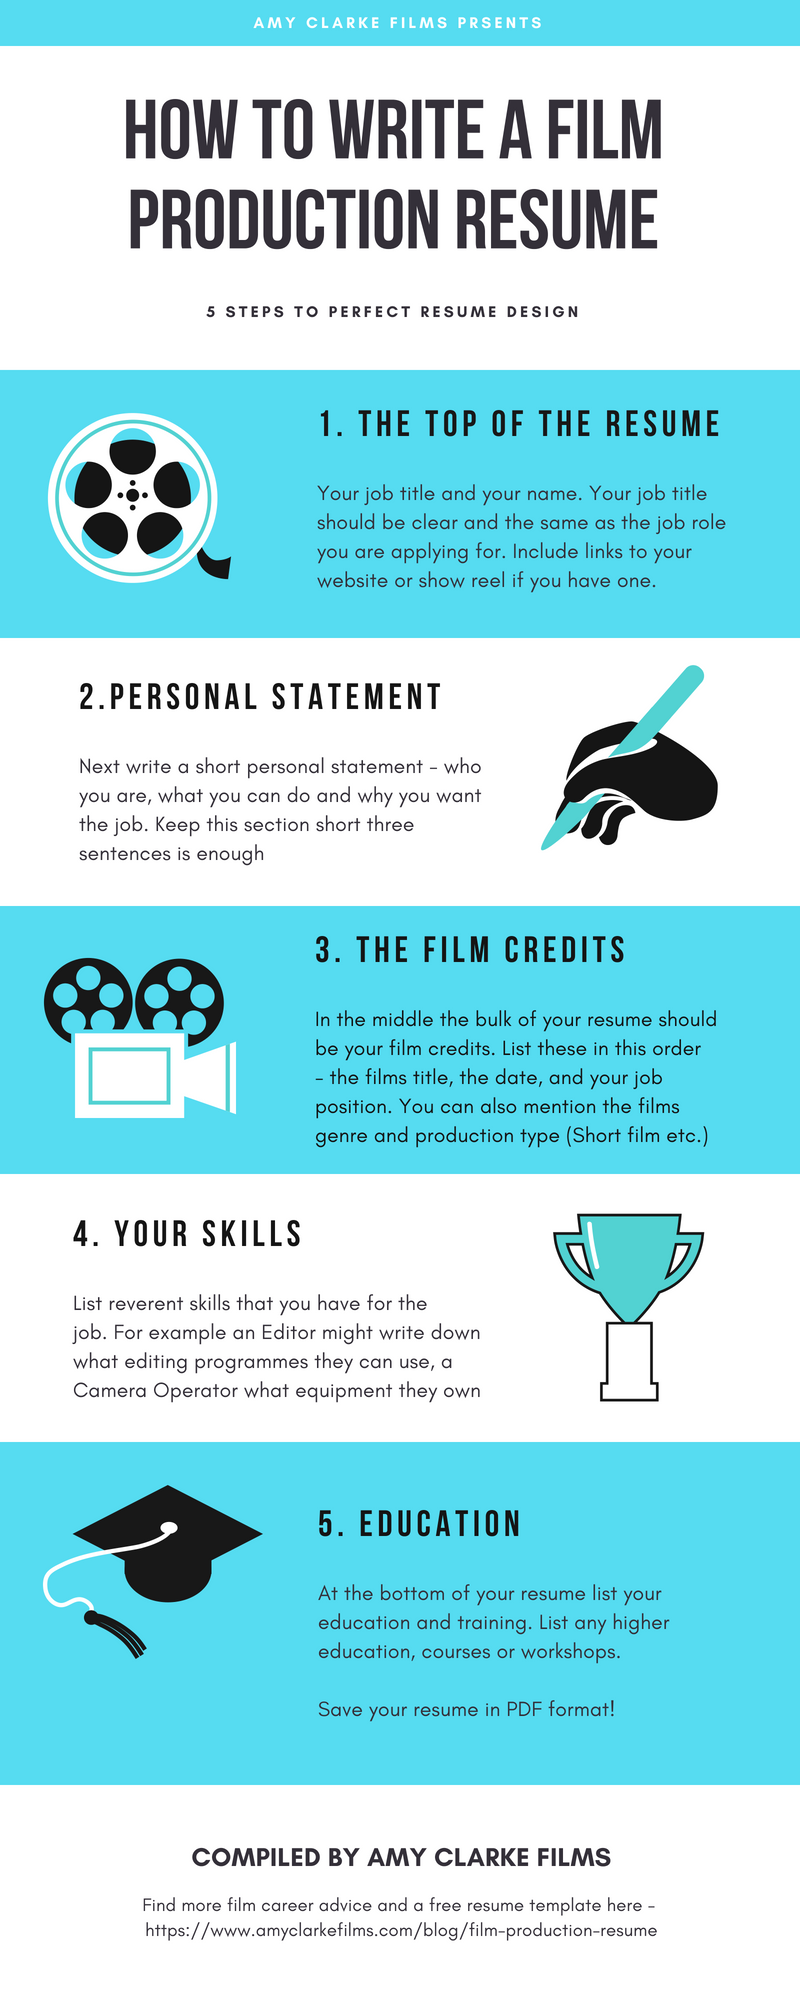 10-steps-to-writing-your-film-production-resume-amy-clarke-films